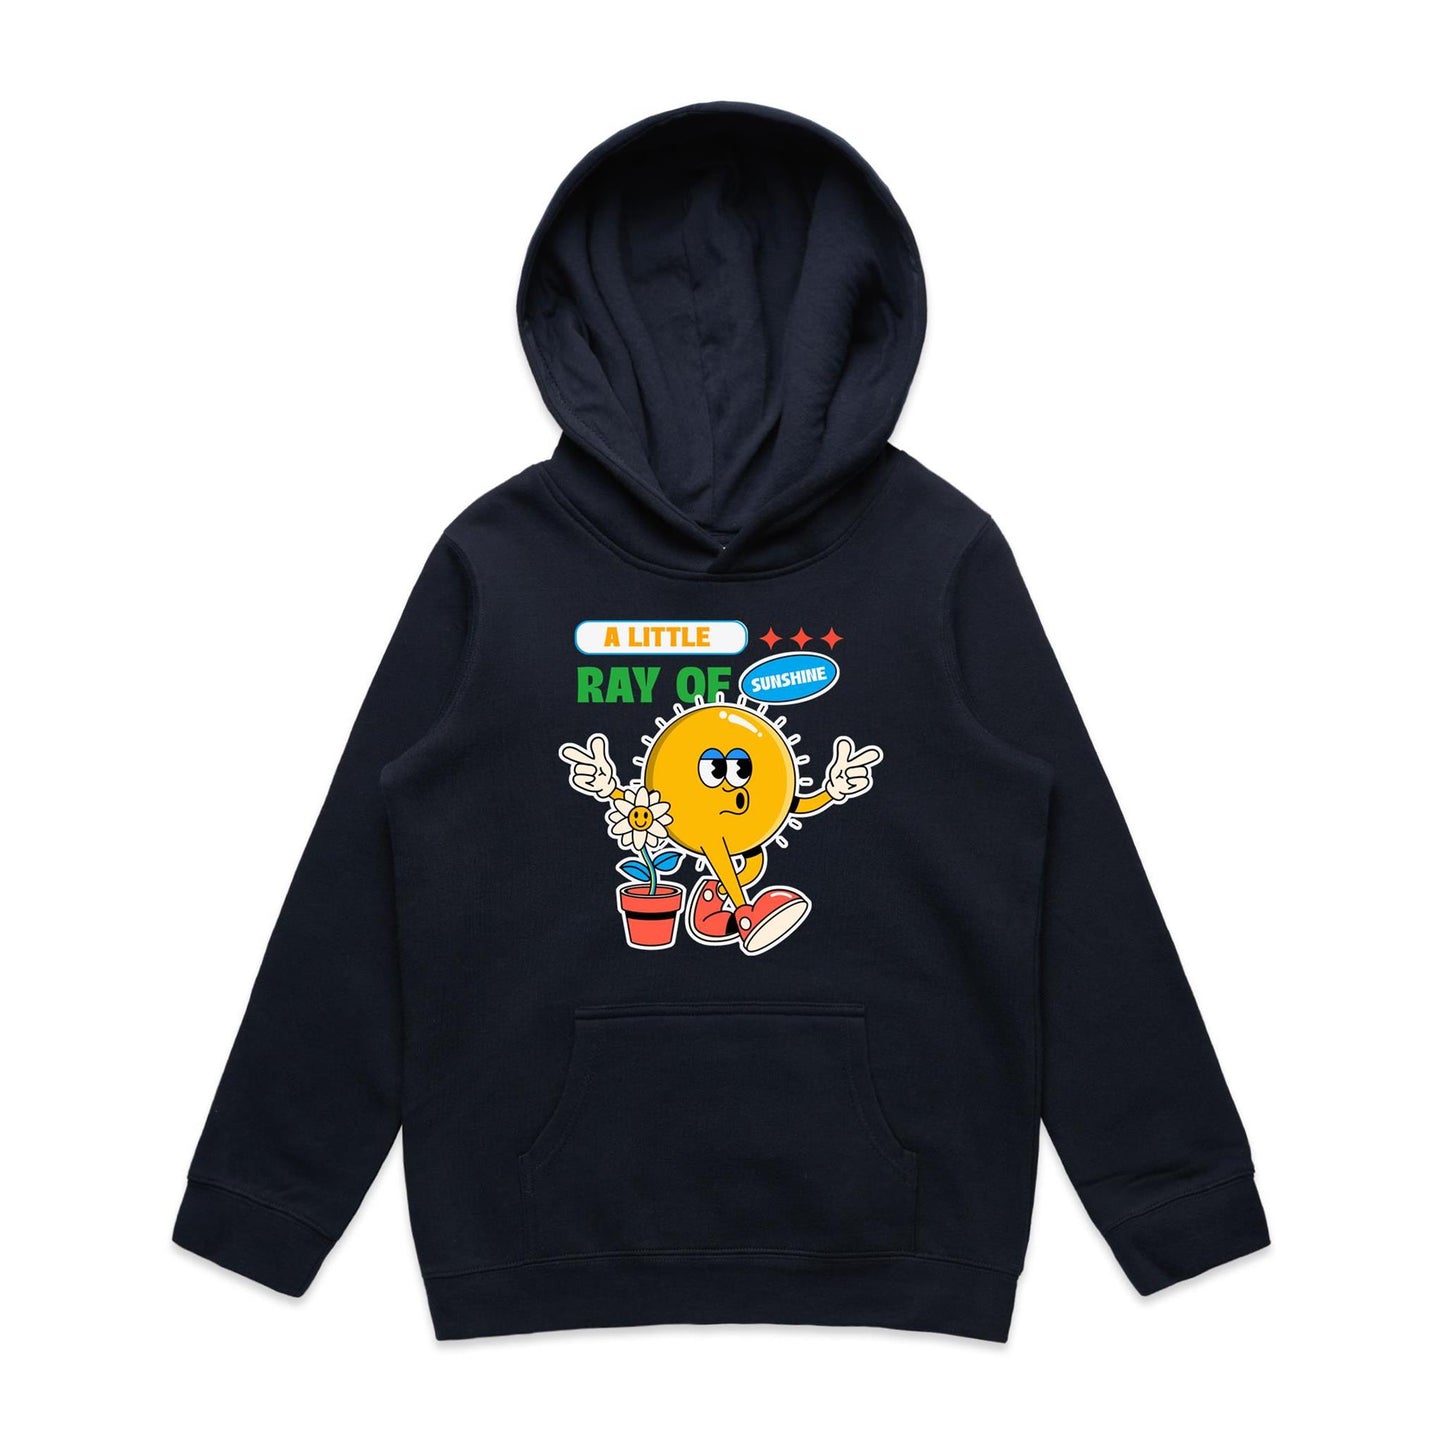 A Little Ray Of Sunshine - Youth Supply Hood Navy Kids Hoodie Retro Summer